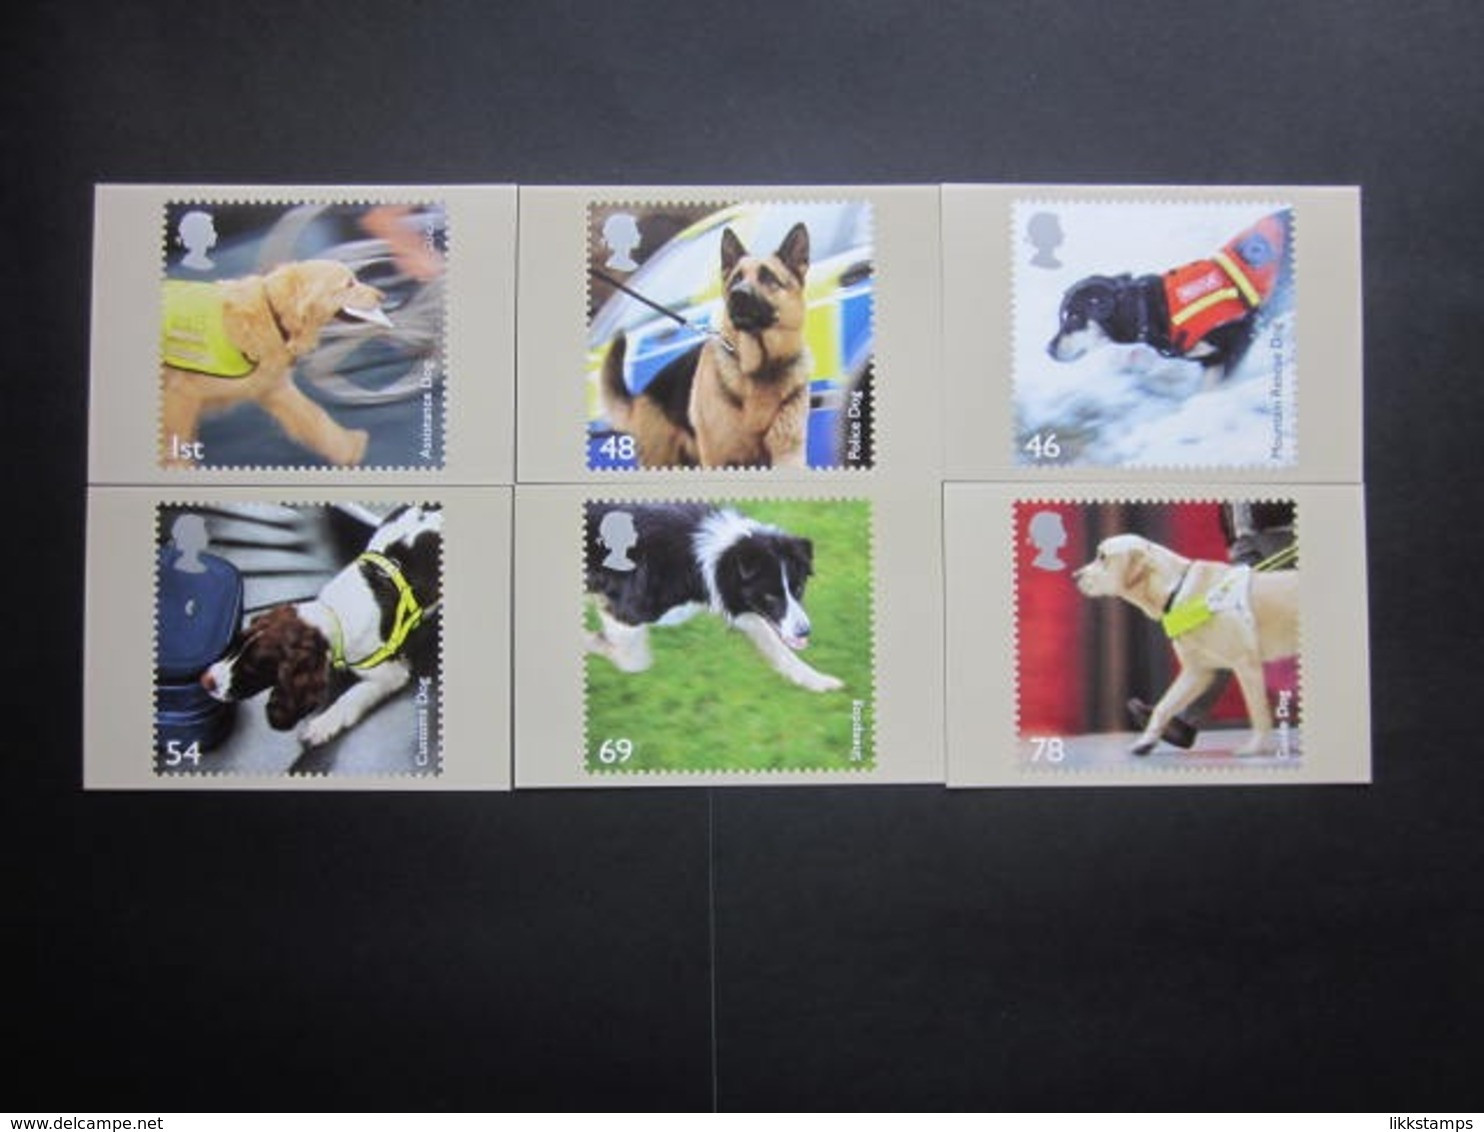 2008 WORKING DOGS P.H.Q. CARDS UNUSED, ISSUE No. 307 #00749 - PHQ Karten